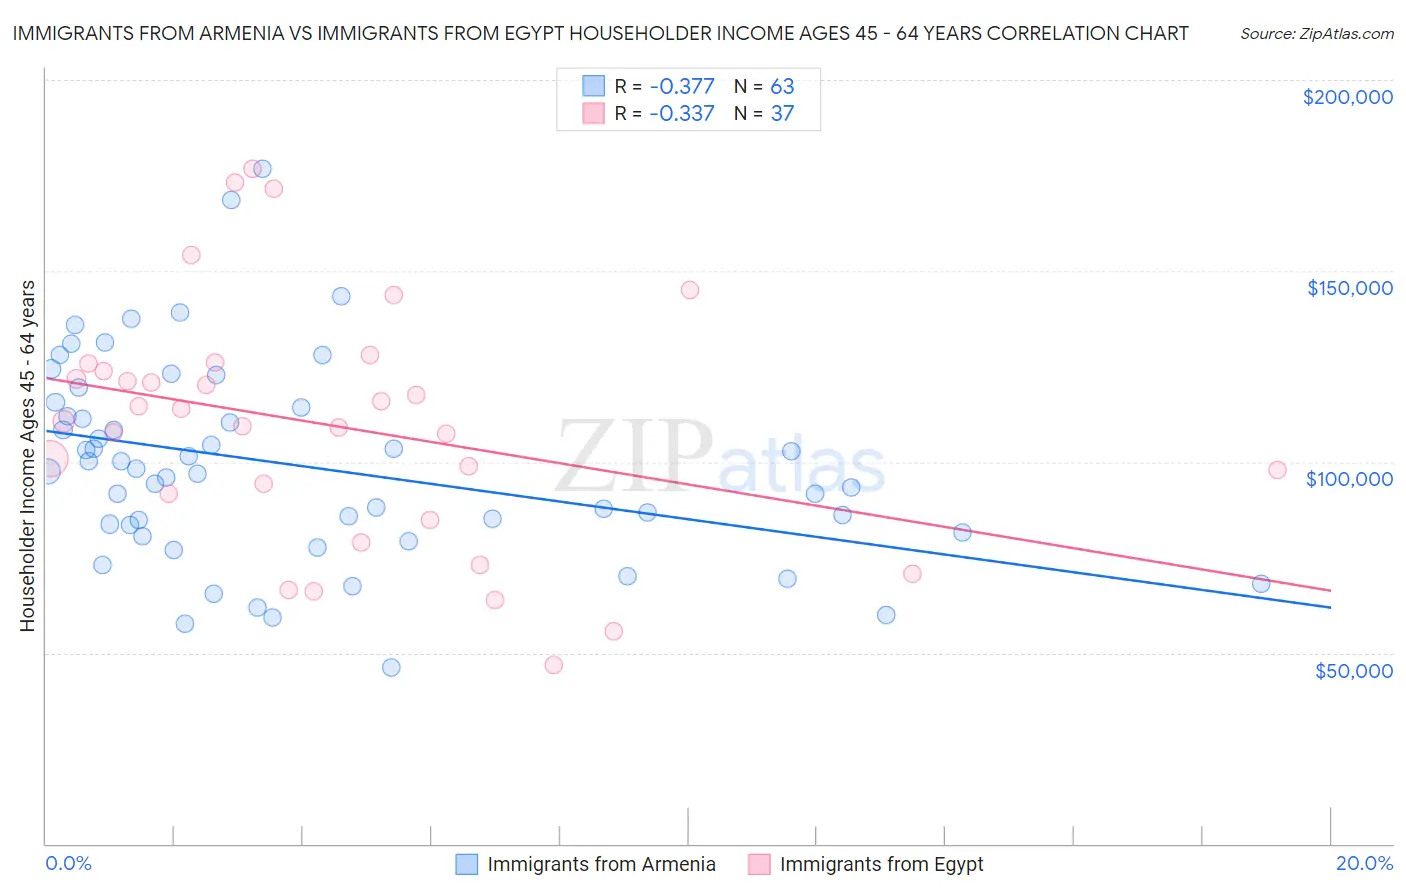 Immigrants from Armenia vs Immigrants from Egypt Householder Income Ages 45 - 64 years